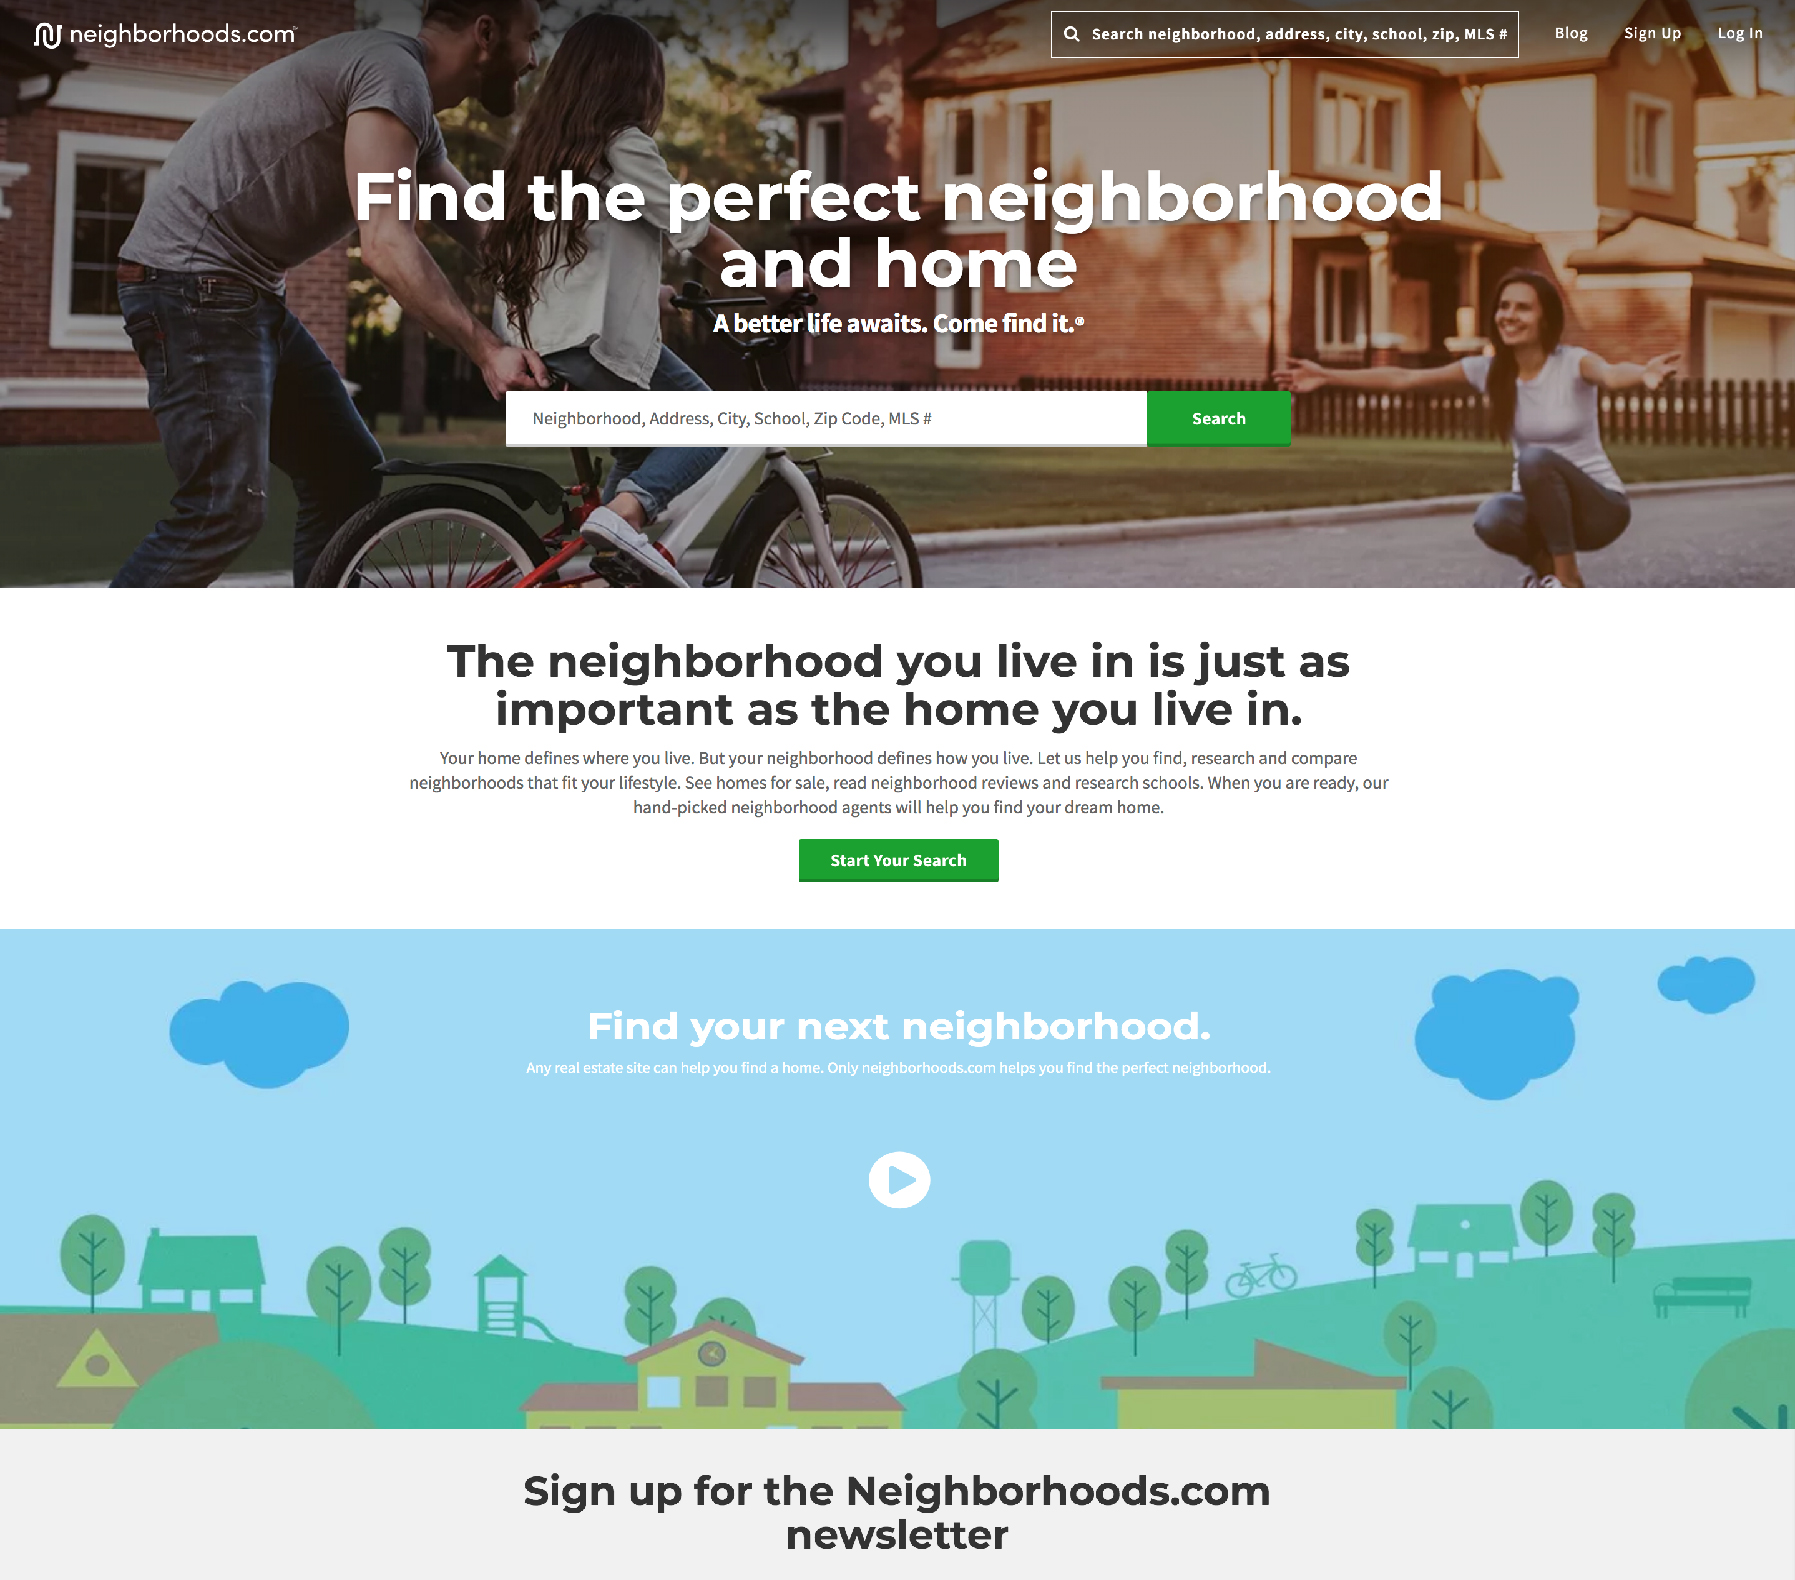 Screenshot of the homepage for neighborhoods.com with search bar and graphics.